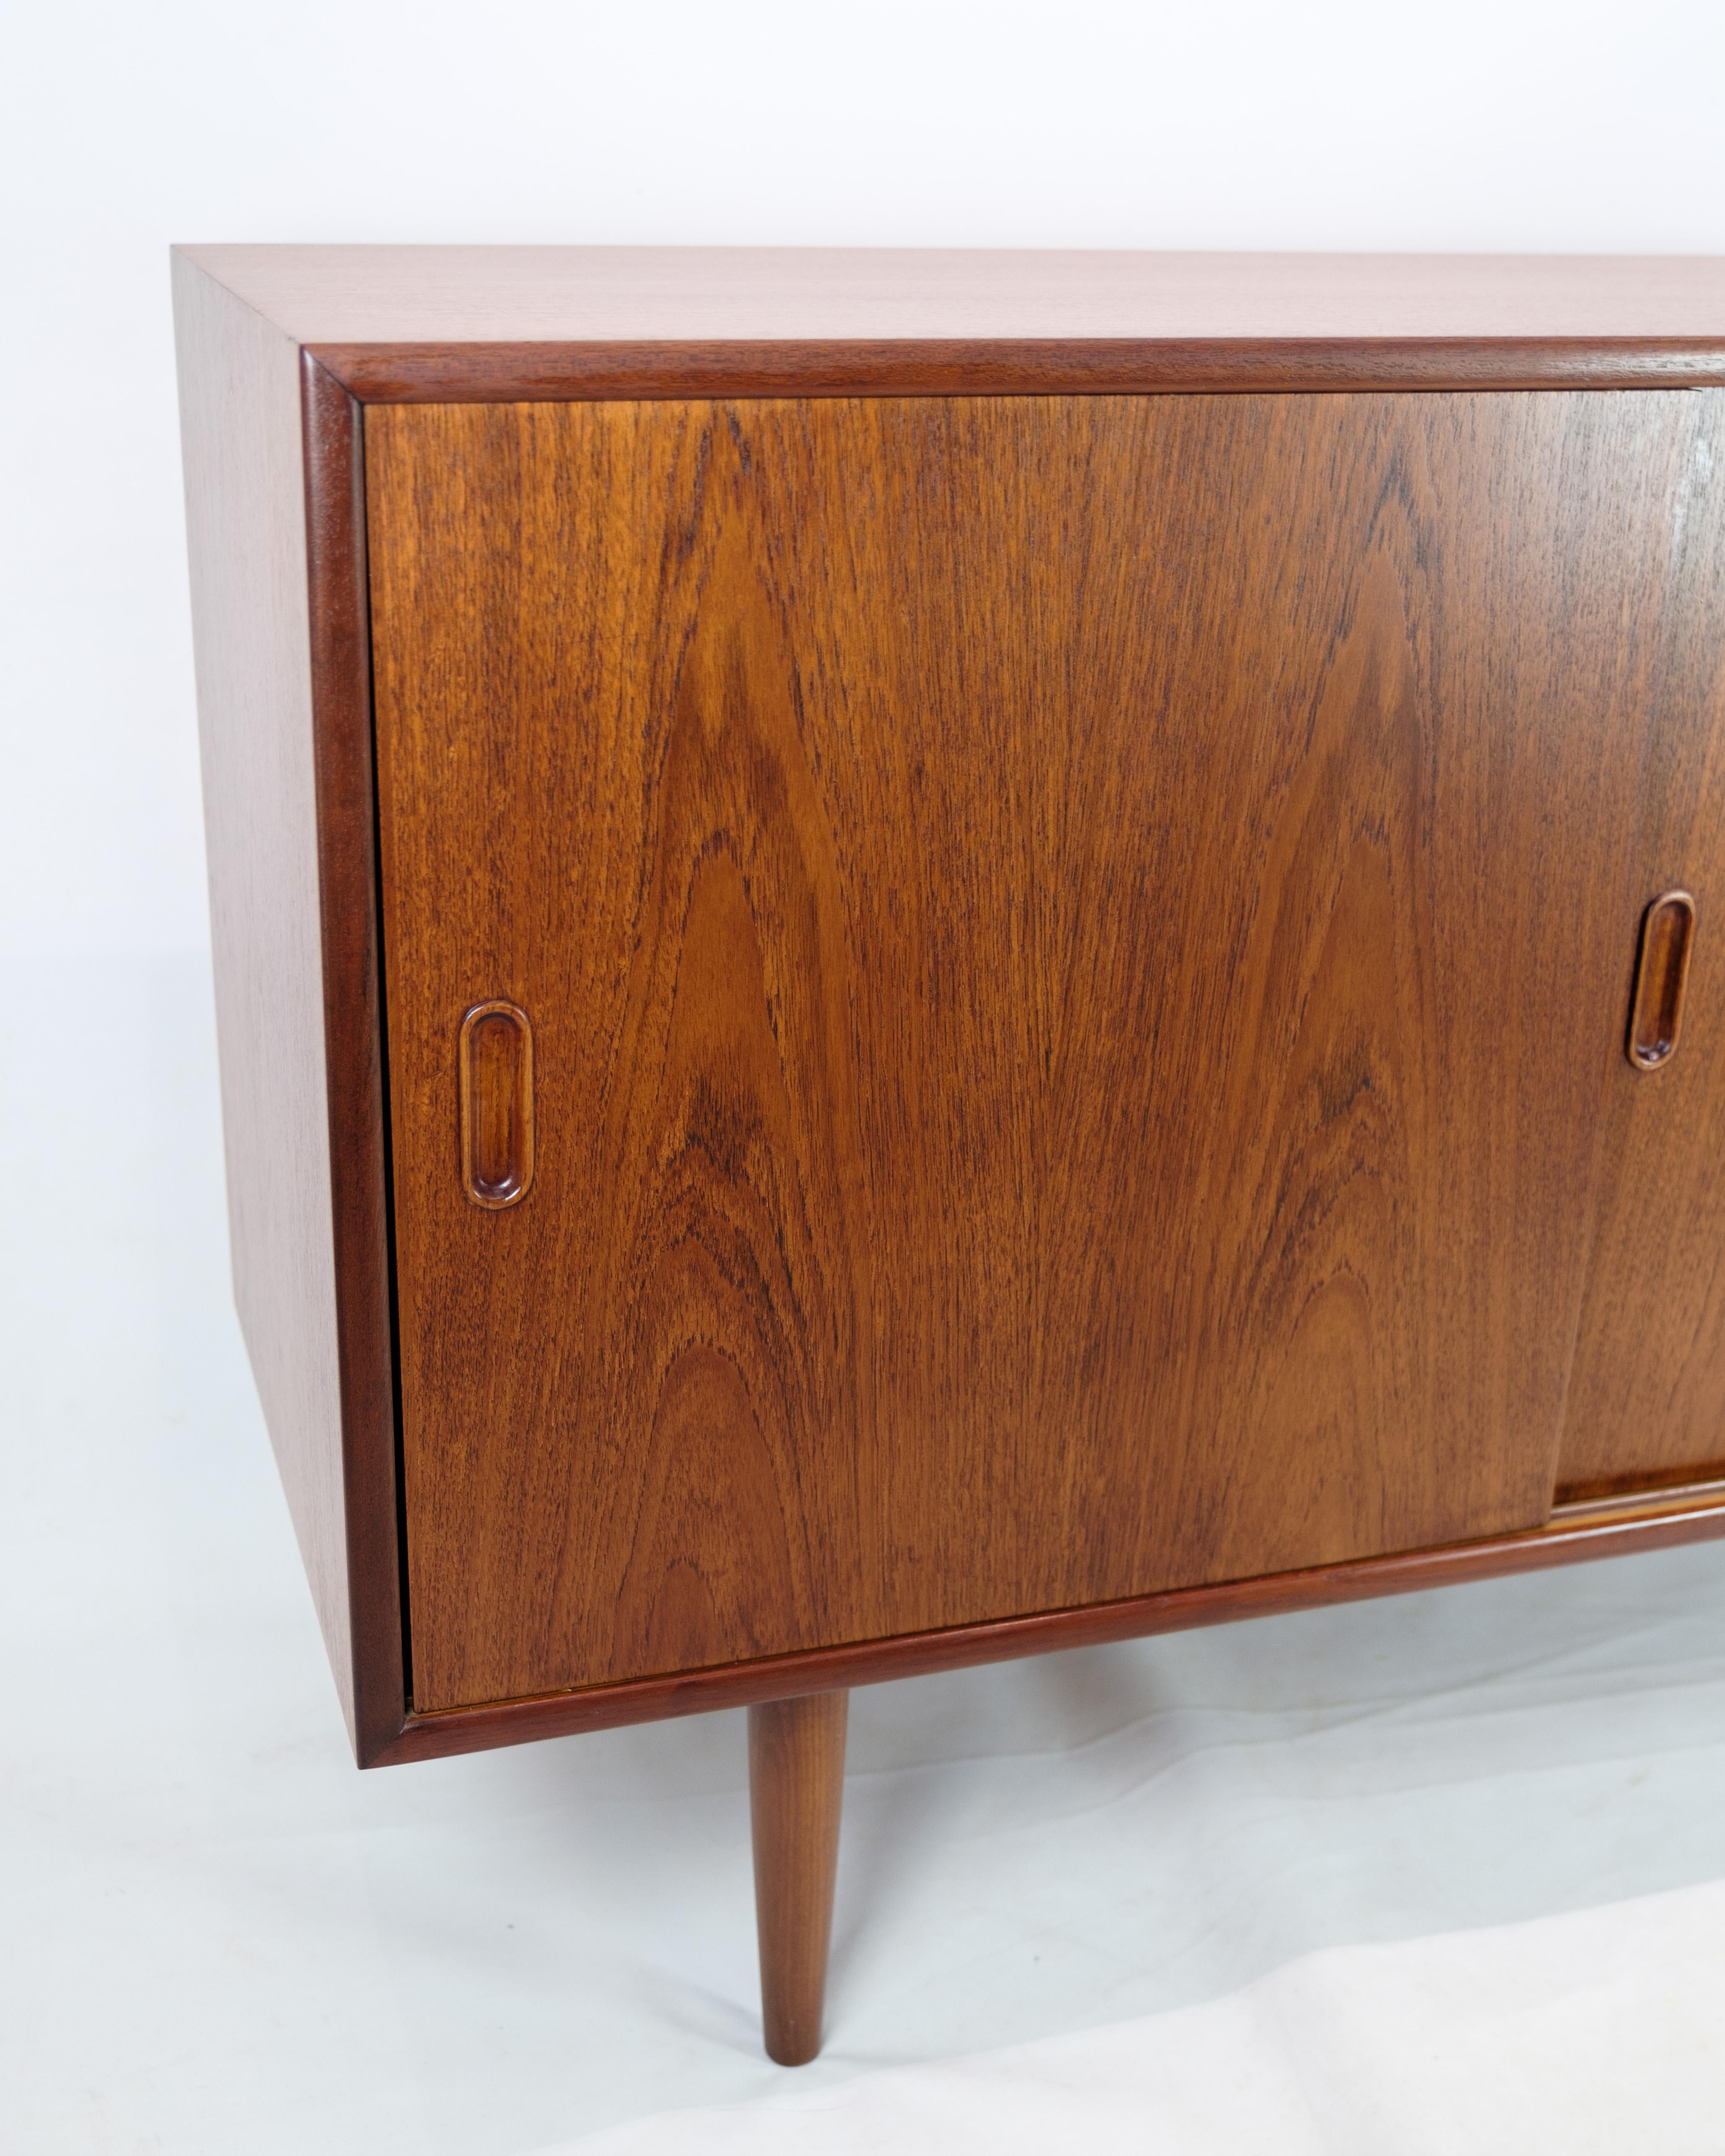 Teak sideboard of Danish design with sliding doors with internal shelves and drawers from around the 1960s.

Measurements in cm: H:78.5 W:159 D:45